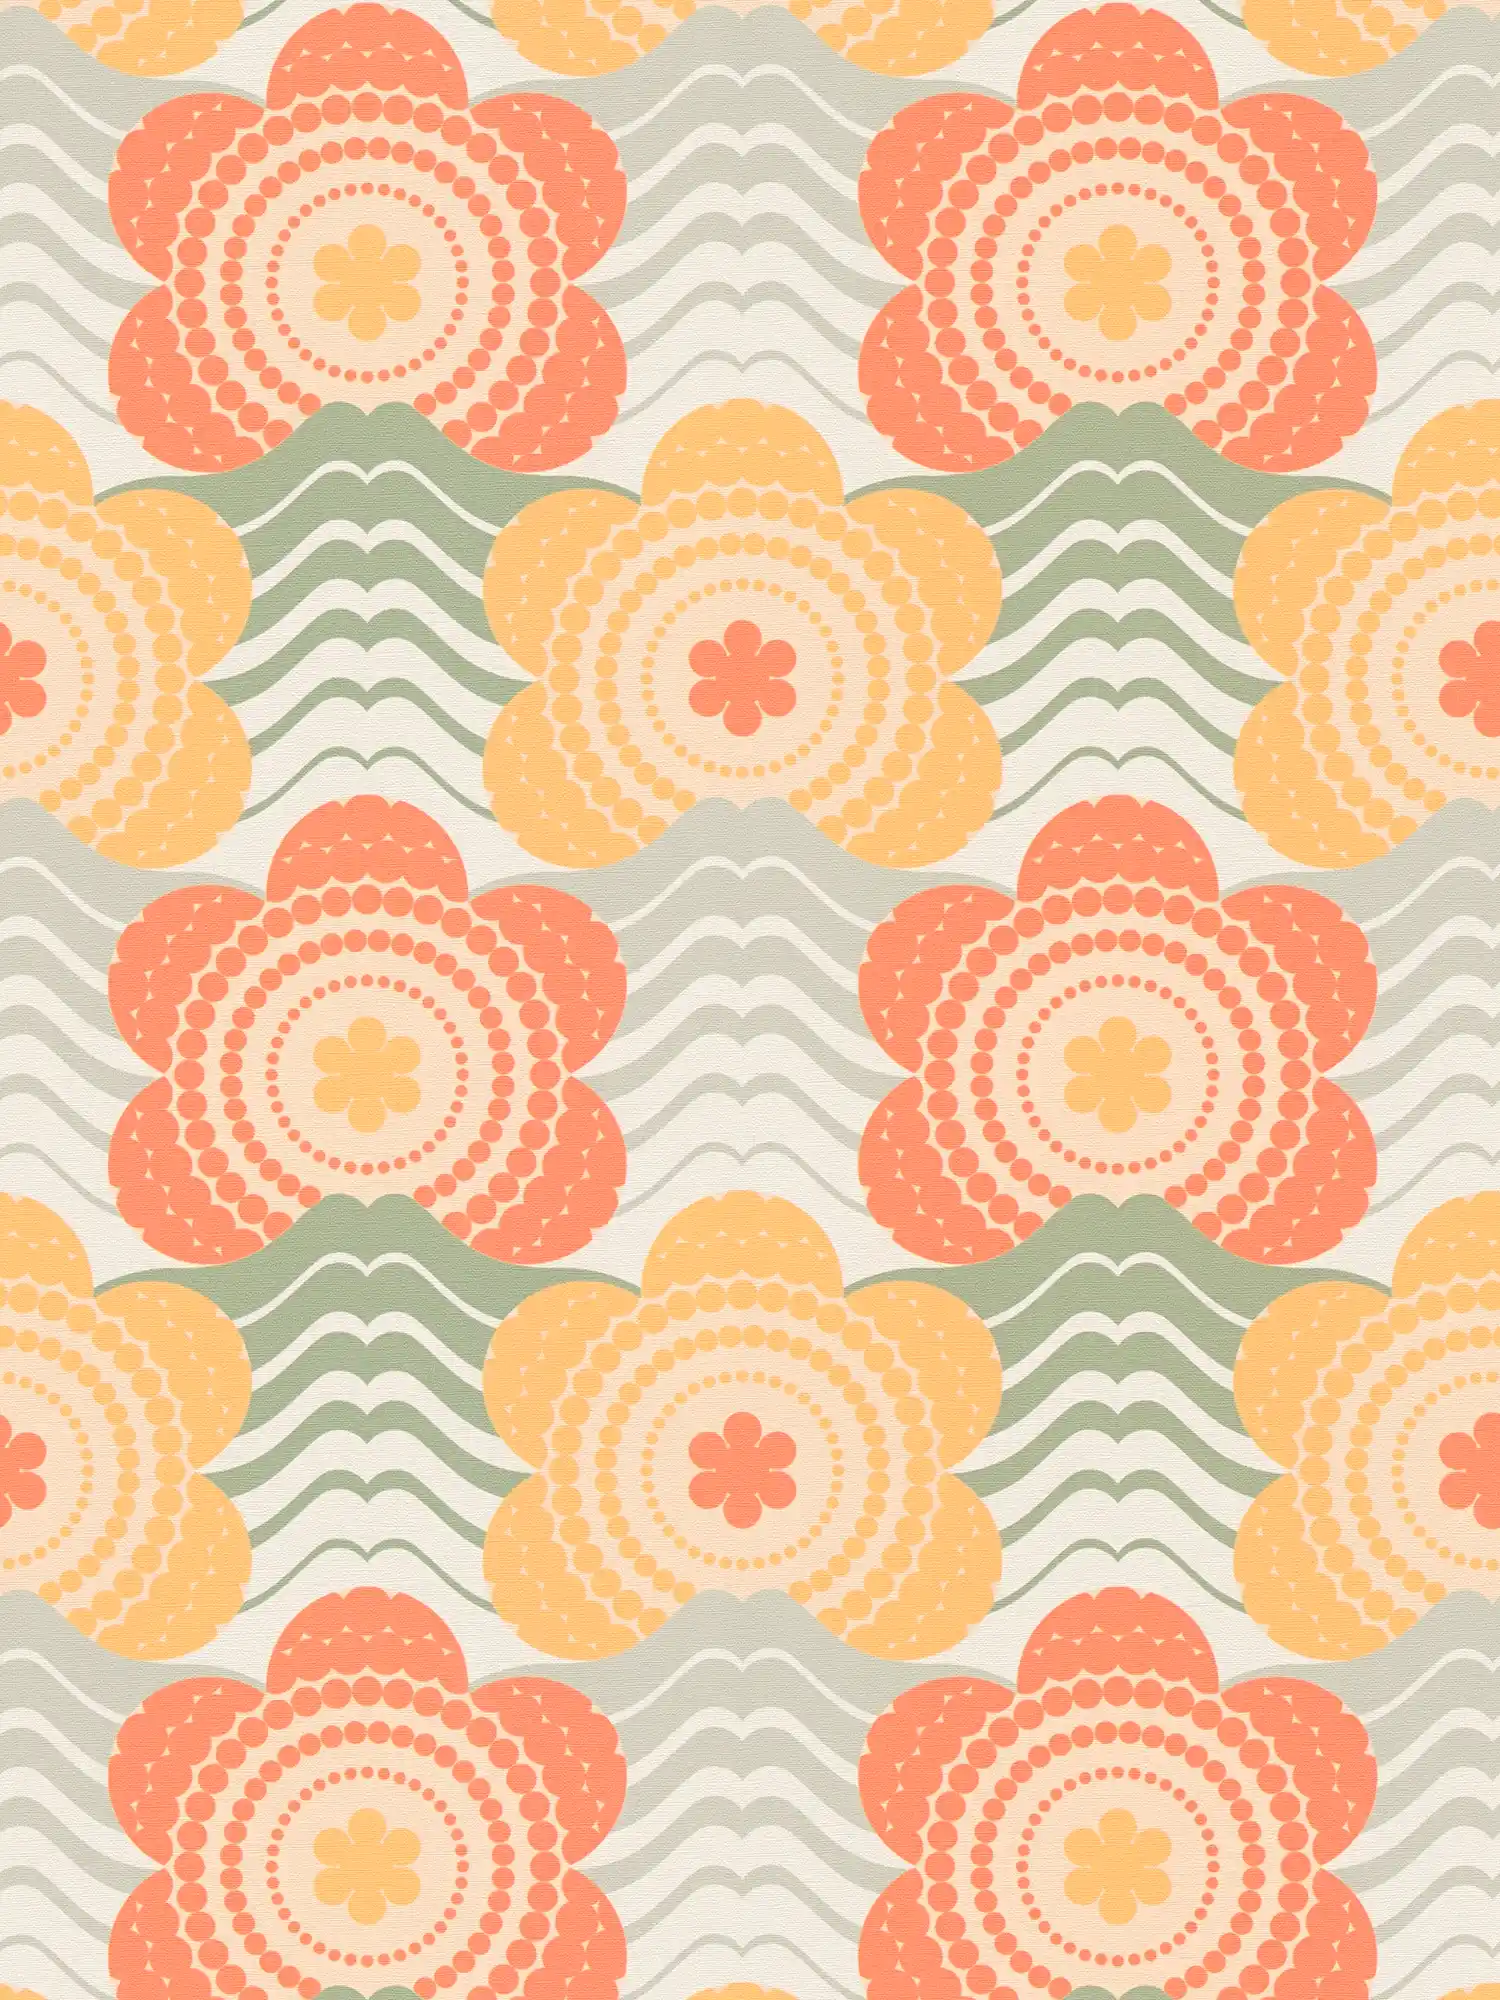 Retro non-woven wallpaper with waves and flowers pattern - orange, yellow, green
